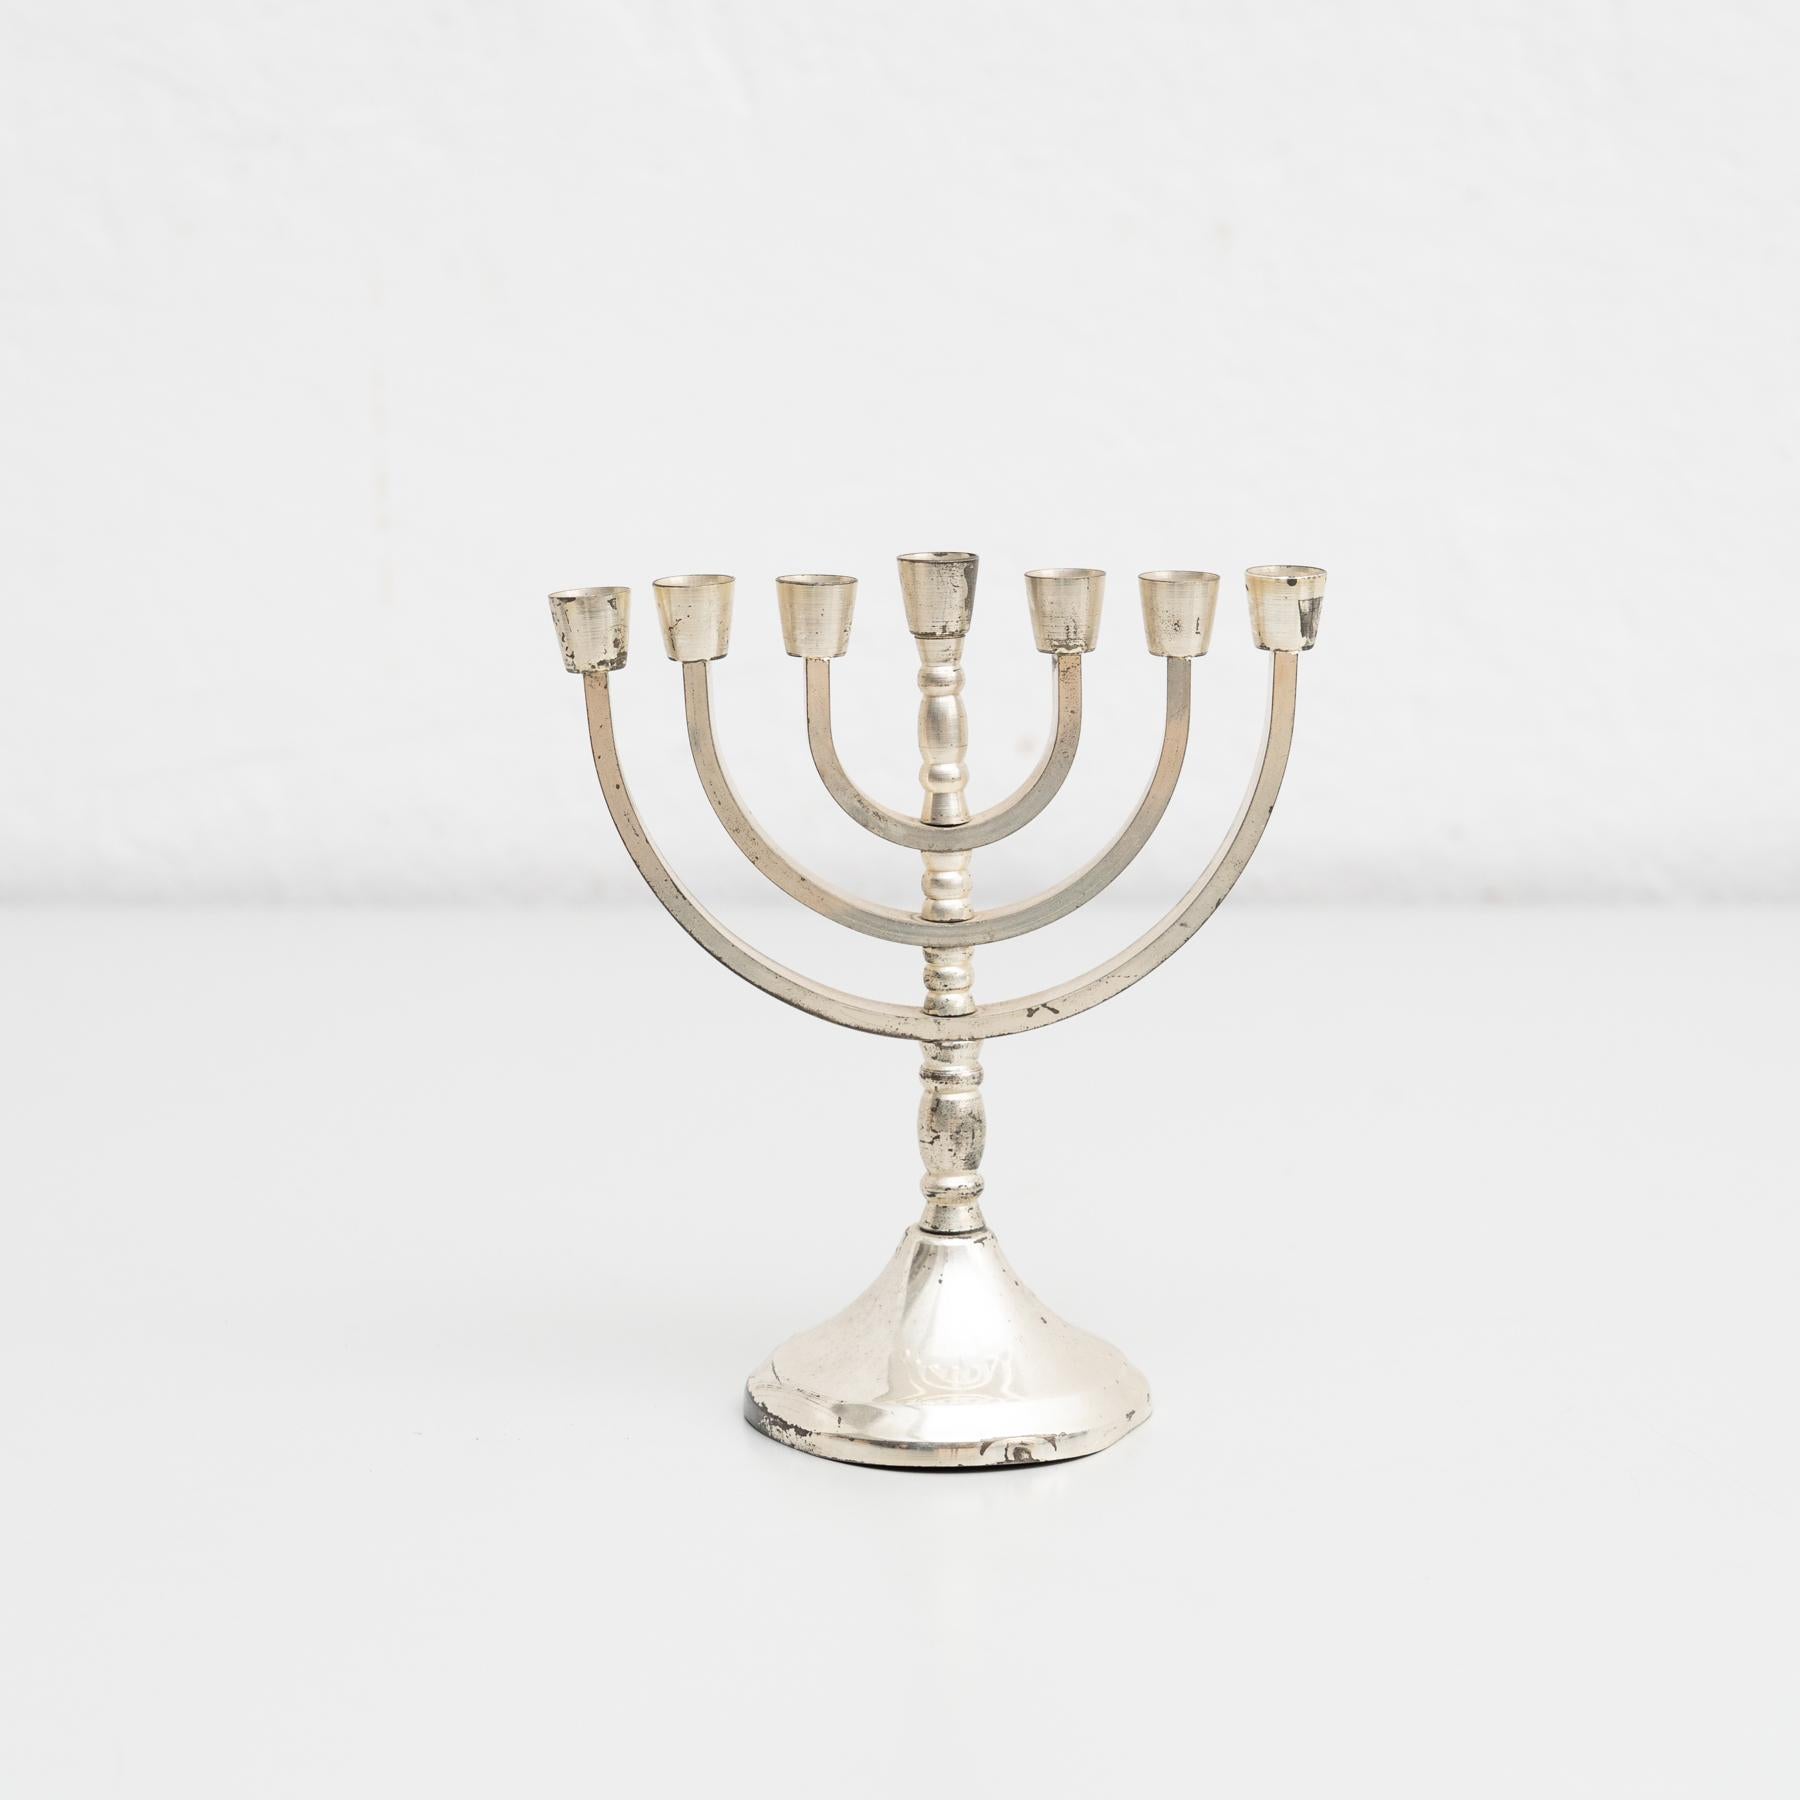 Other Antique Silver 7 Branches Menorah Candle Holder, circa 1950 For Sale